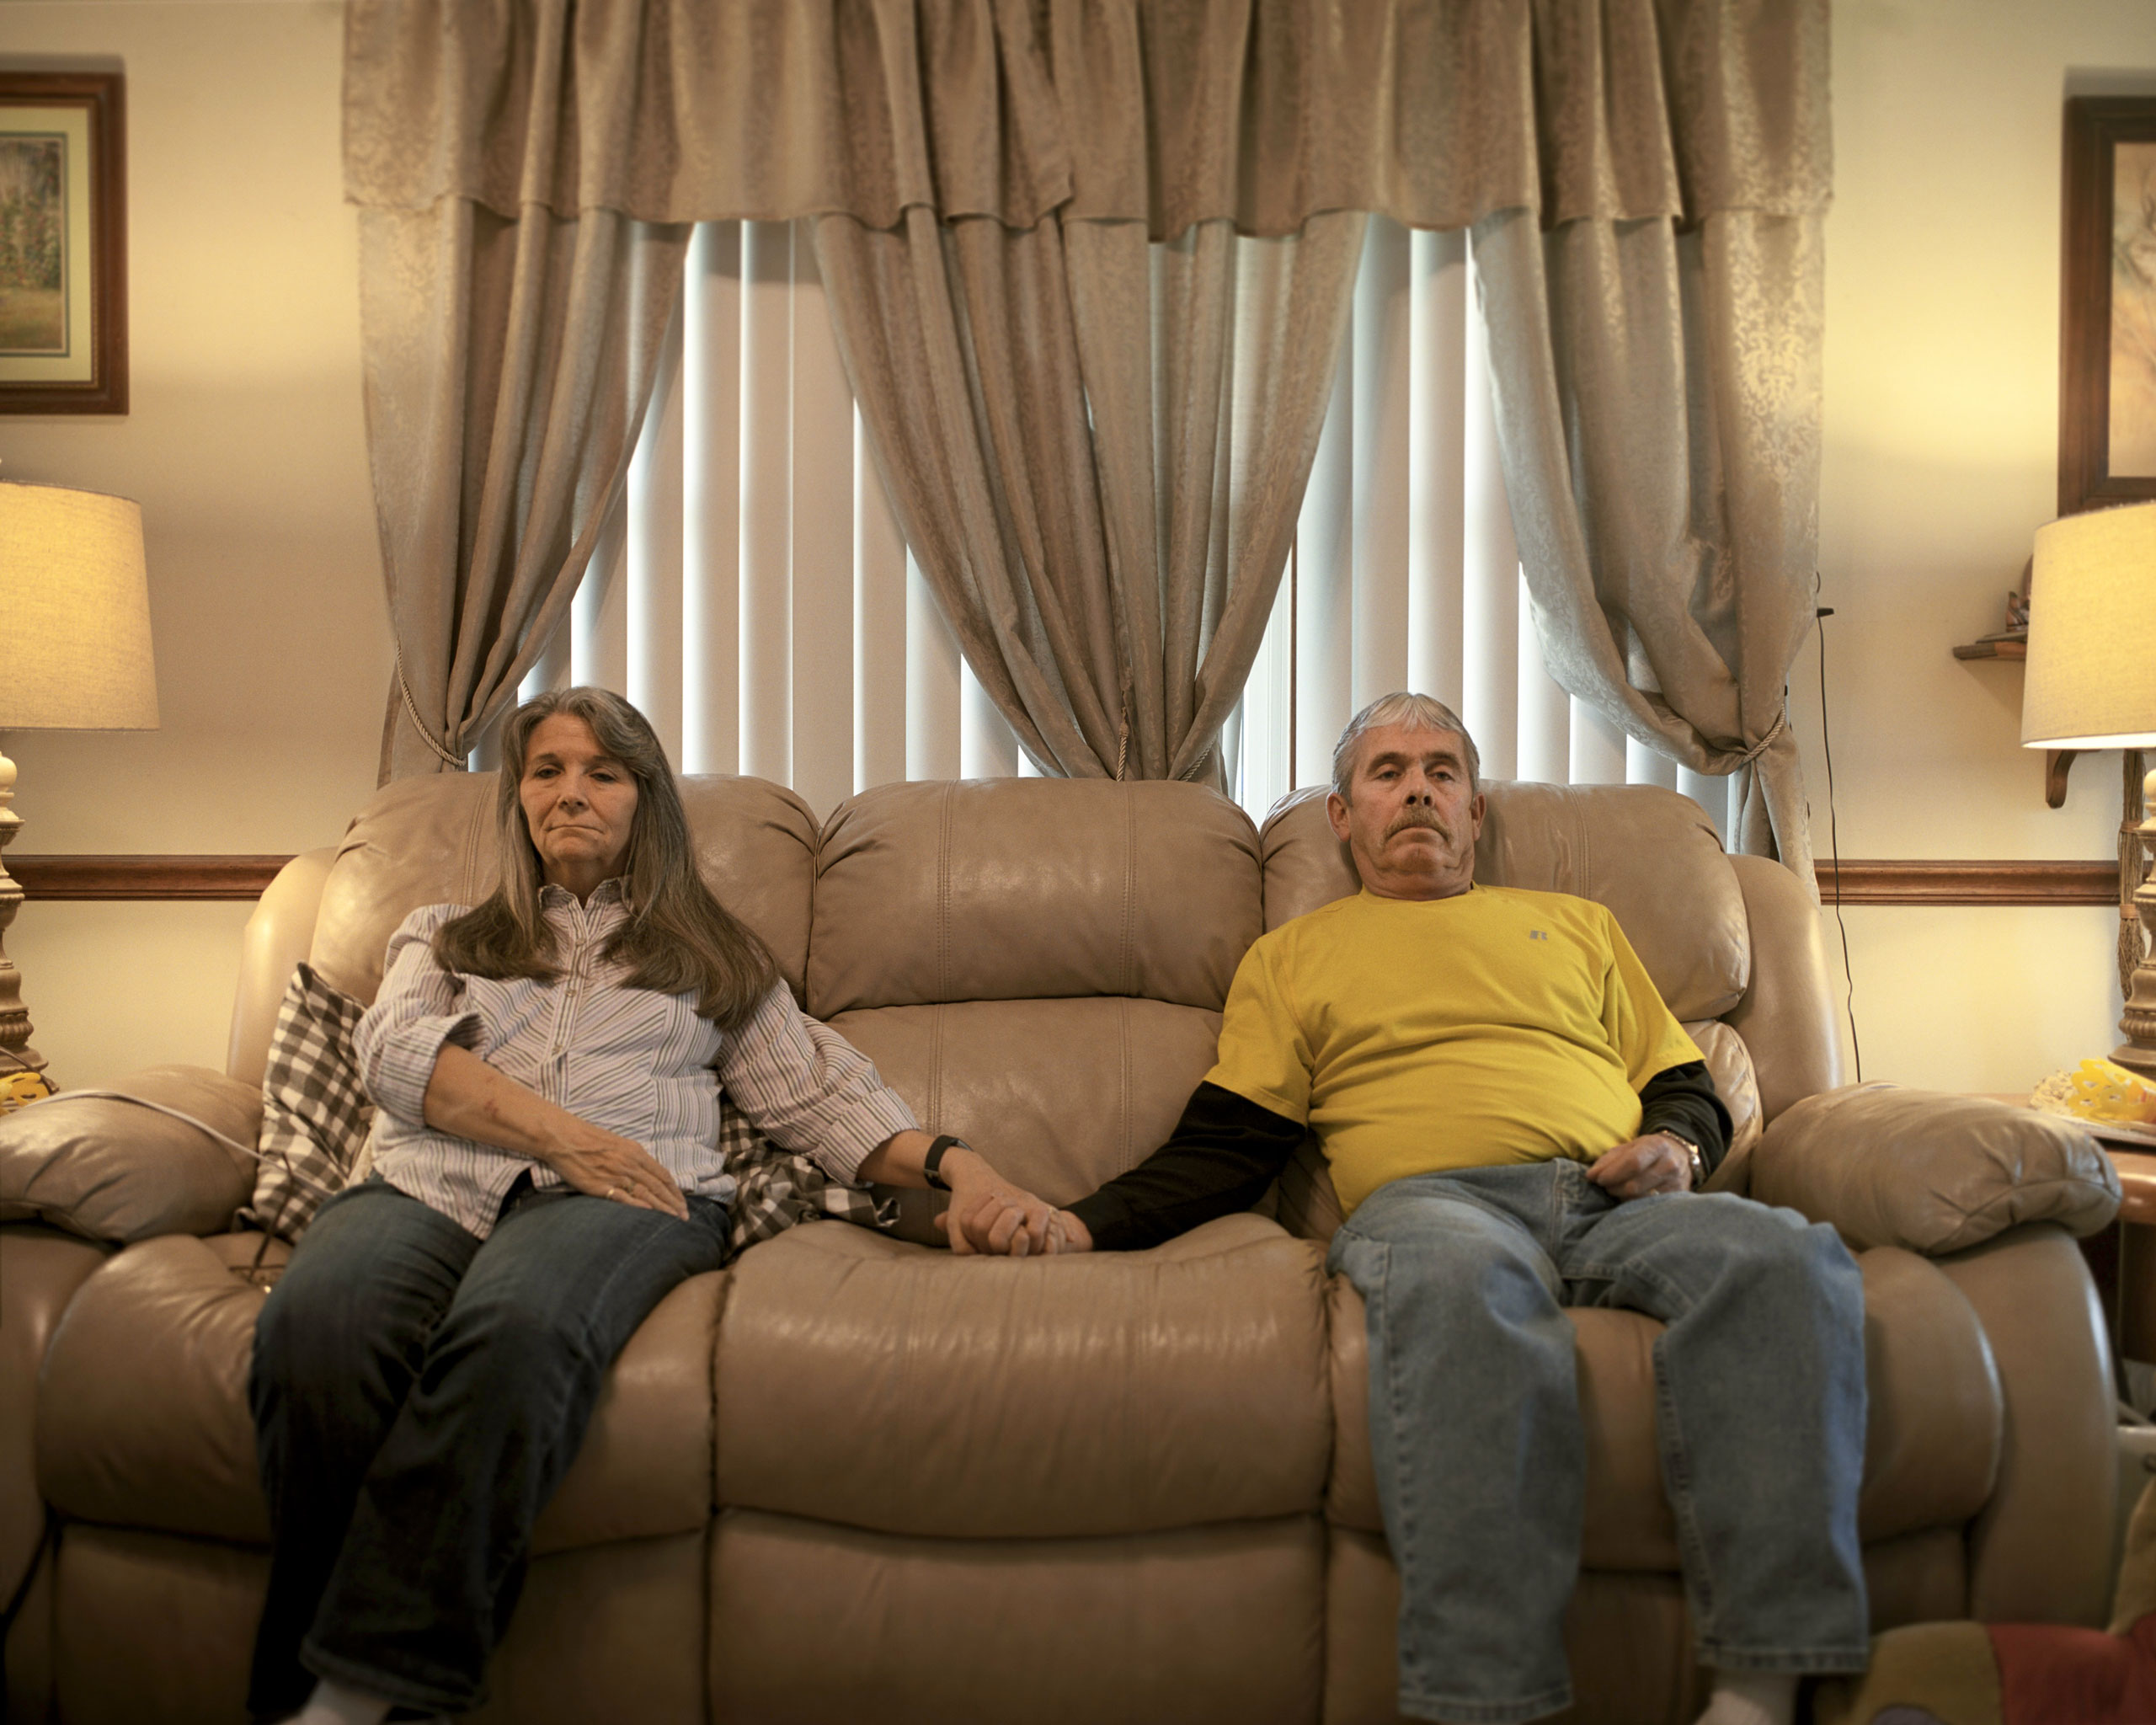 Kyle Beaman and his wife Phyllis, at home in Indianapolis; Beaman, 62, lost his job in April (Inzajeano Latif for TIME)